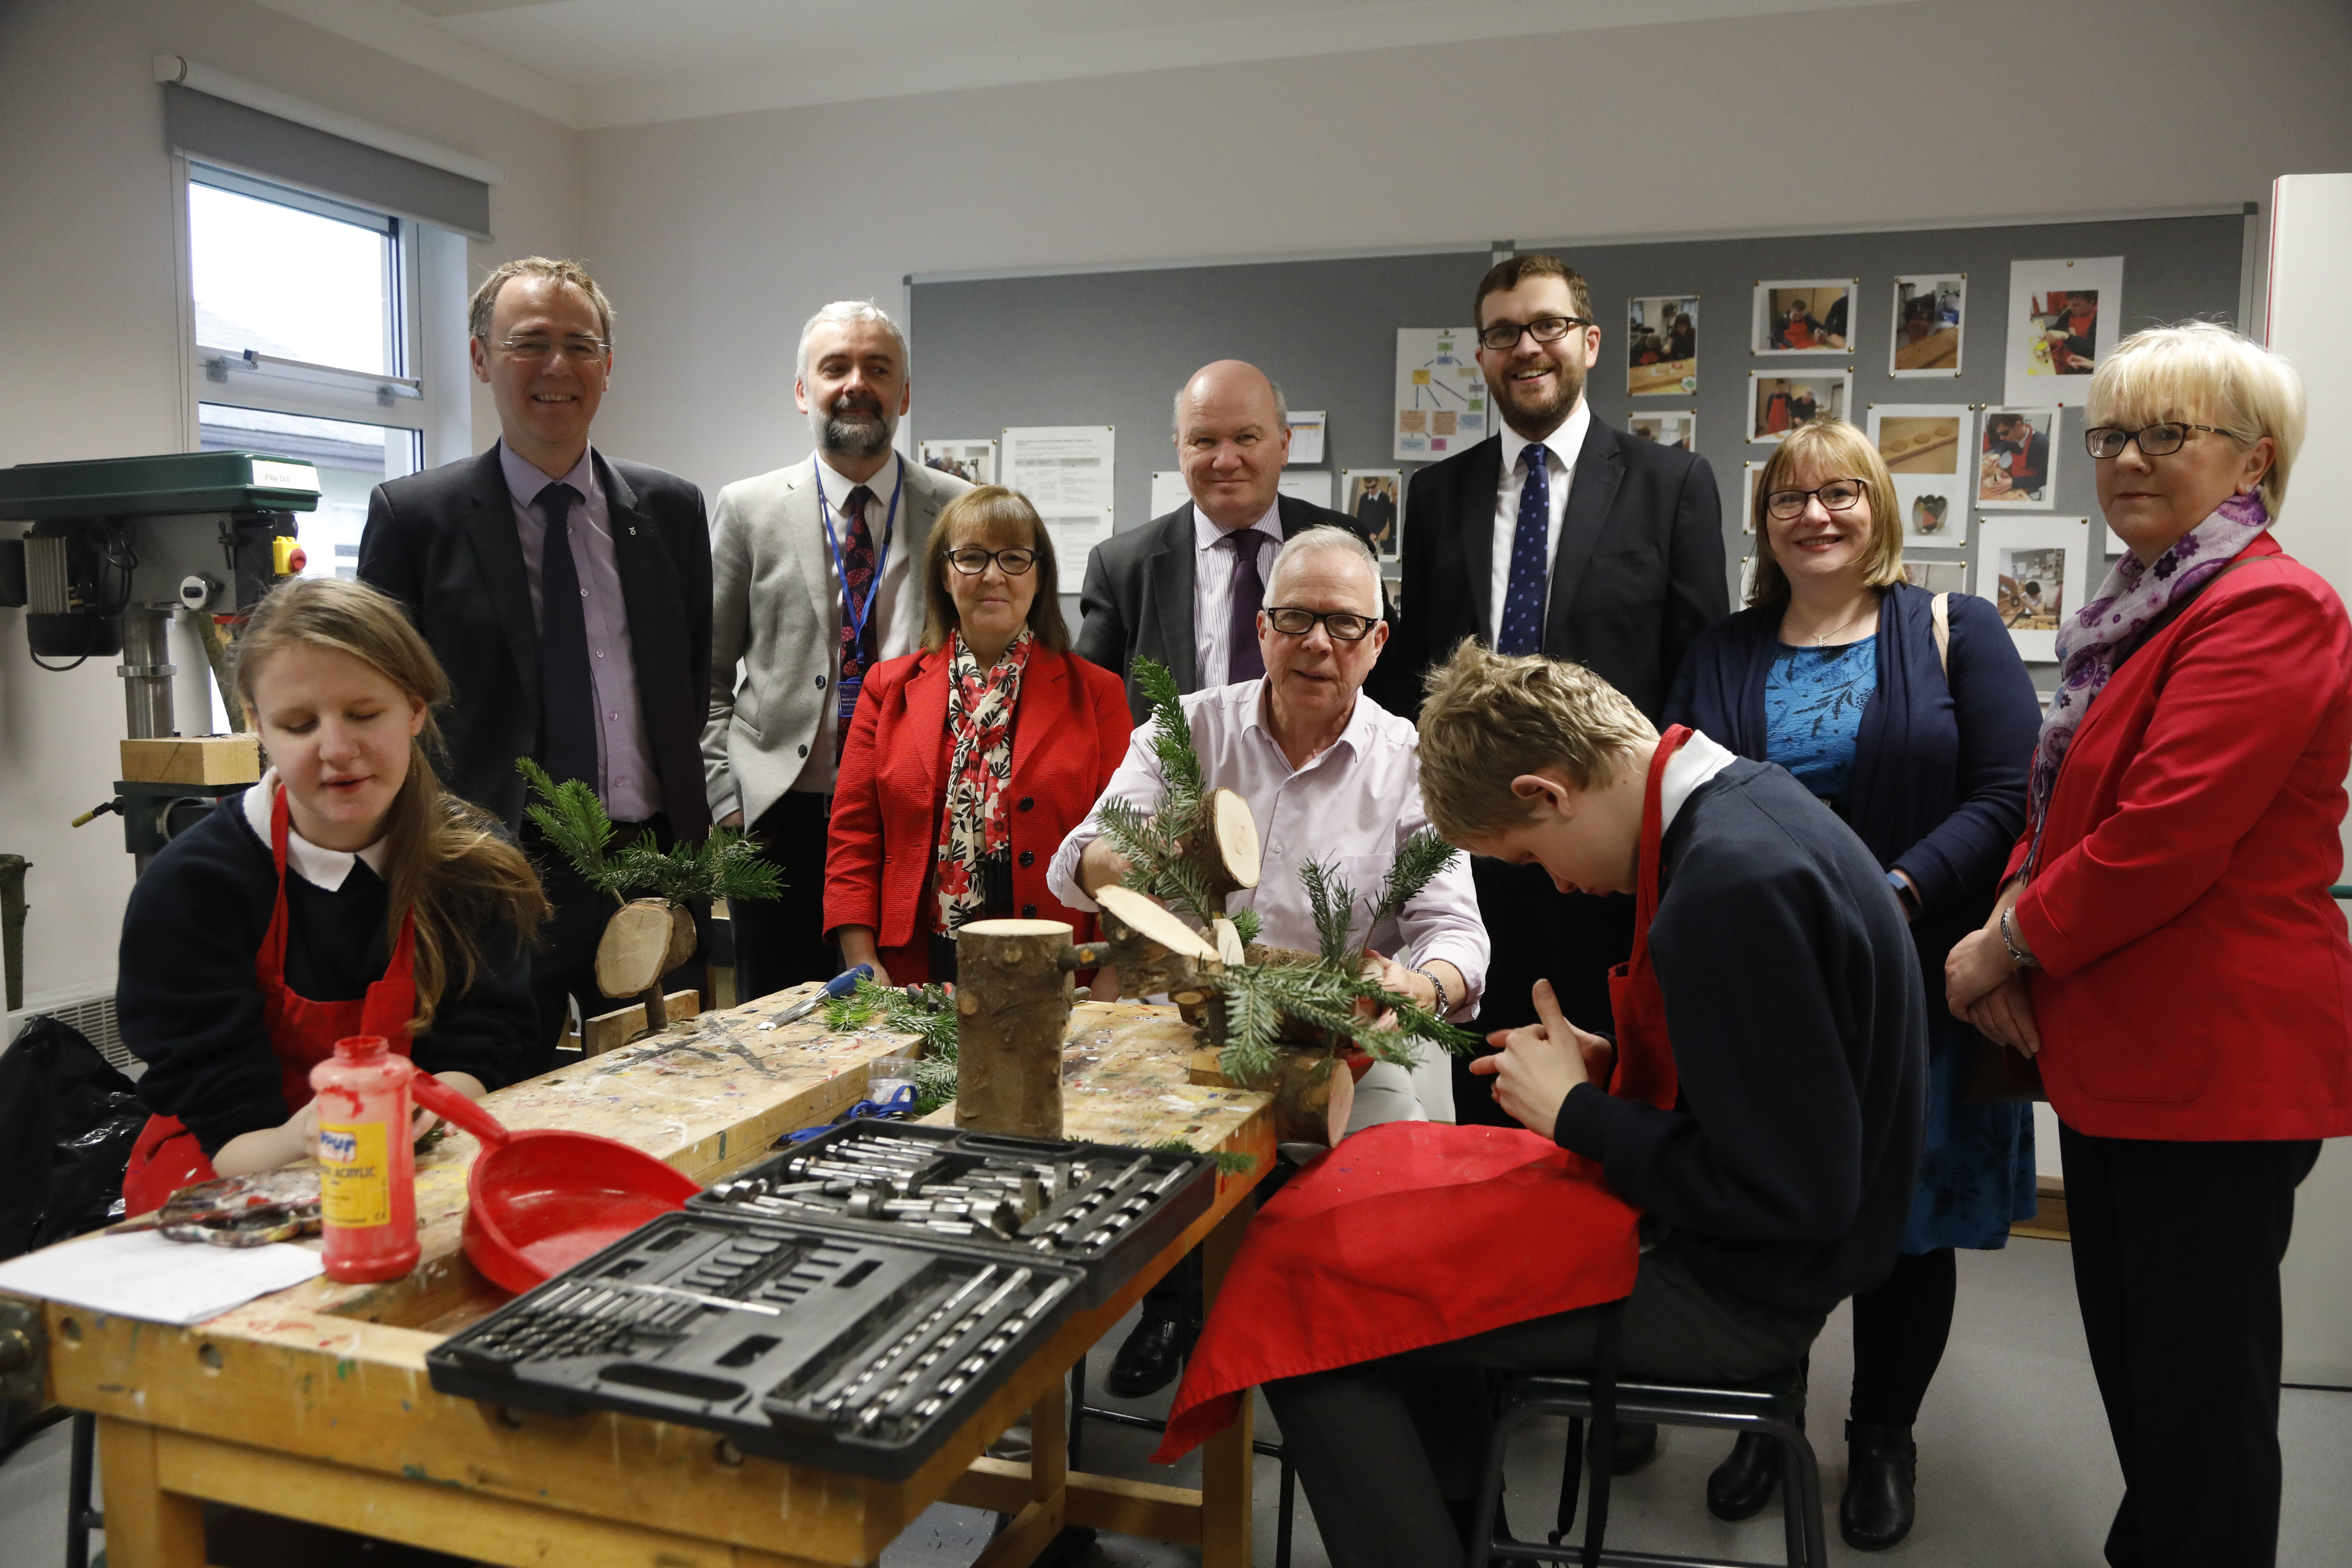 Picture shows Committee Members visiting a workshop at the Royal Blind School with two pupils and a teacher craft-making with pieces of wood and foliage.